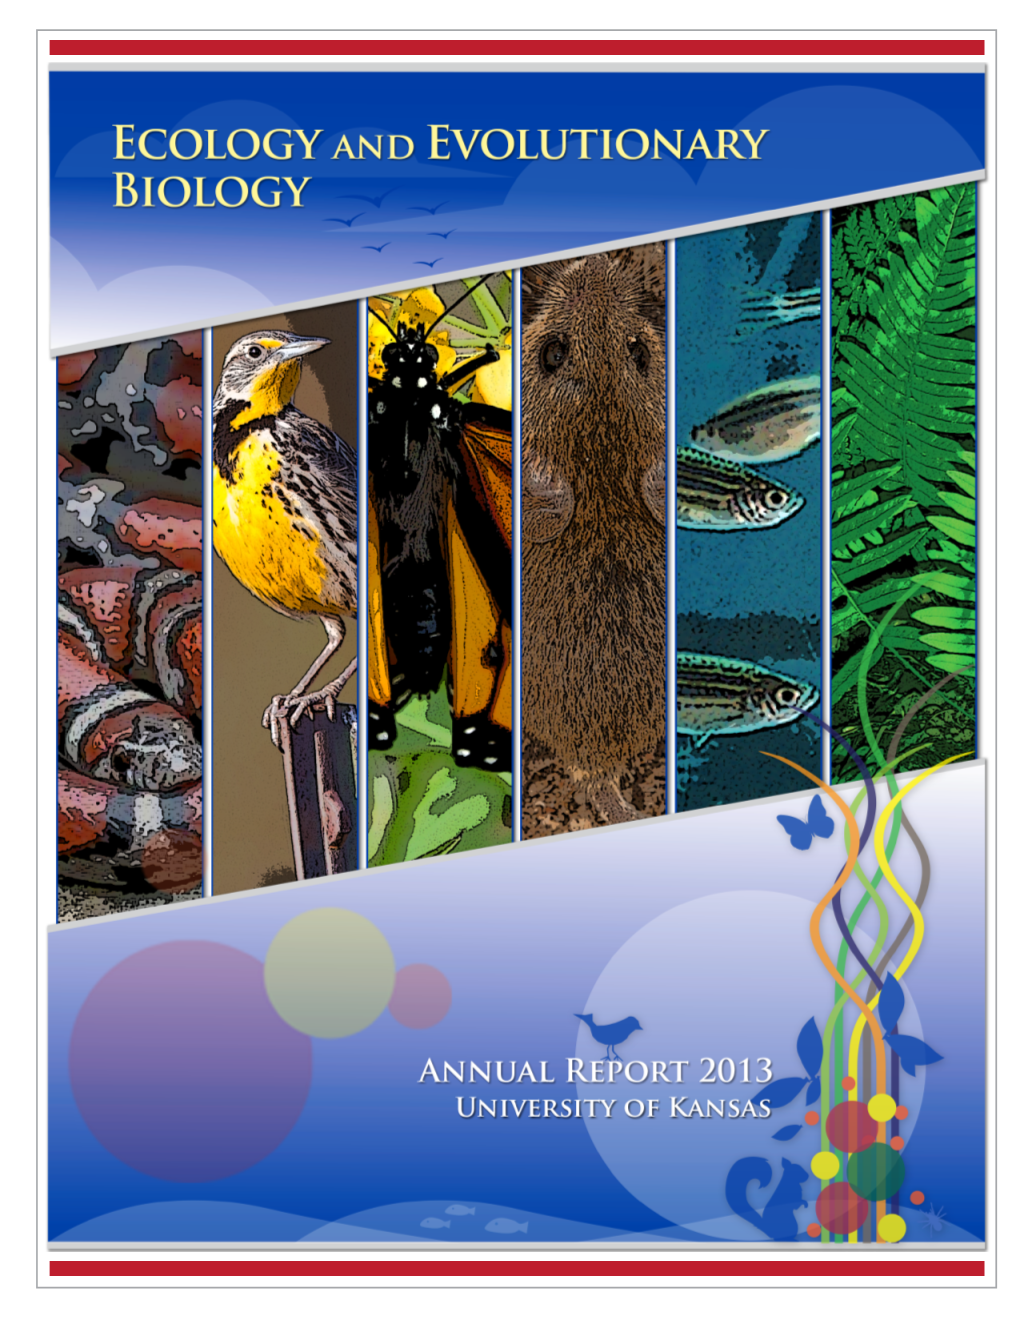 Annual Report of the Department of Ecology and Evolutionary Biology 2013